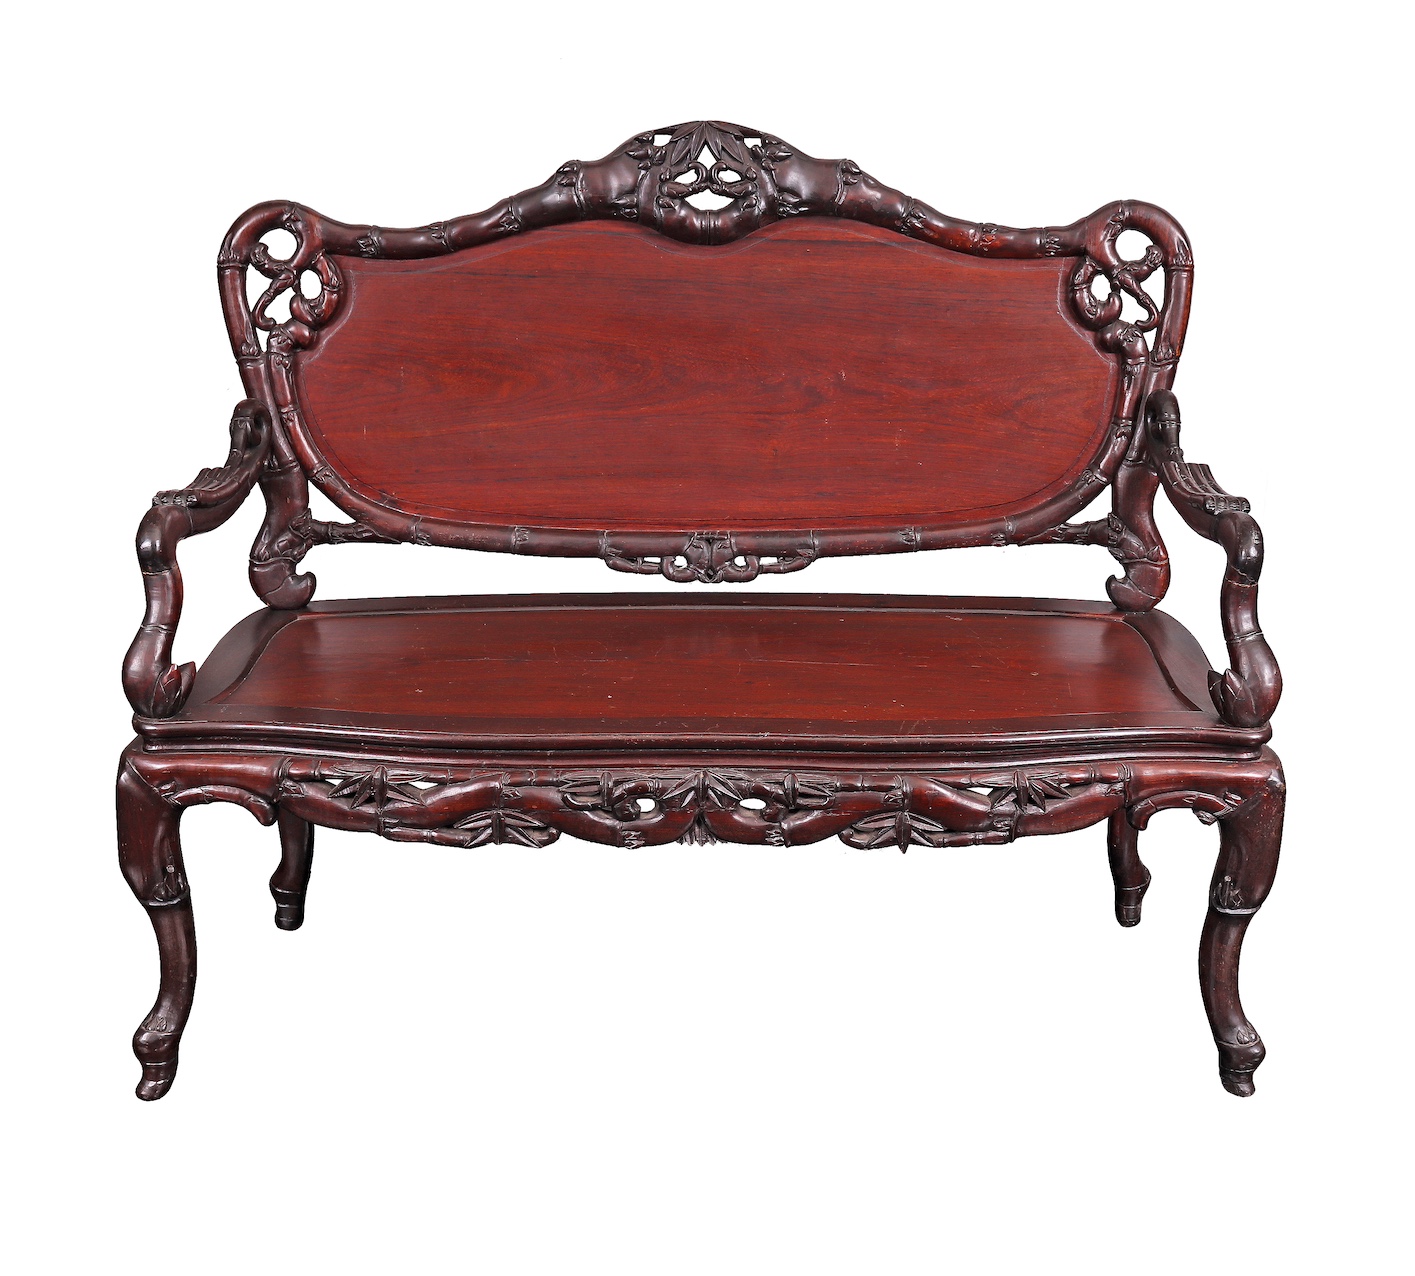 A 20th century Vietnamese carved rosewood sofa